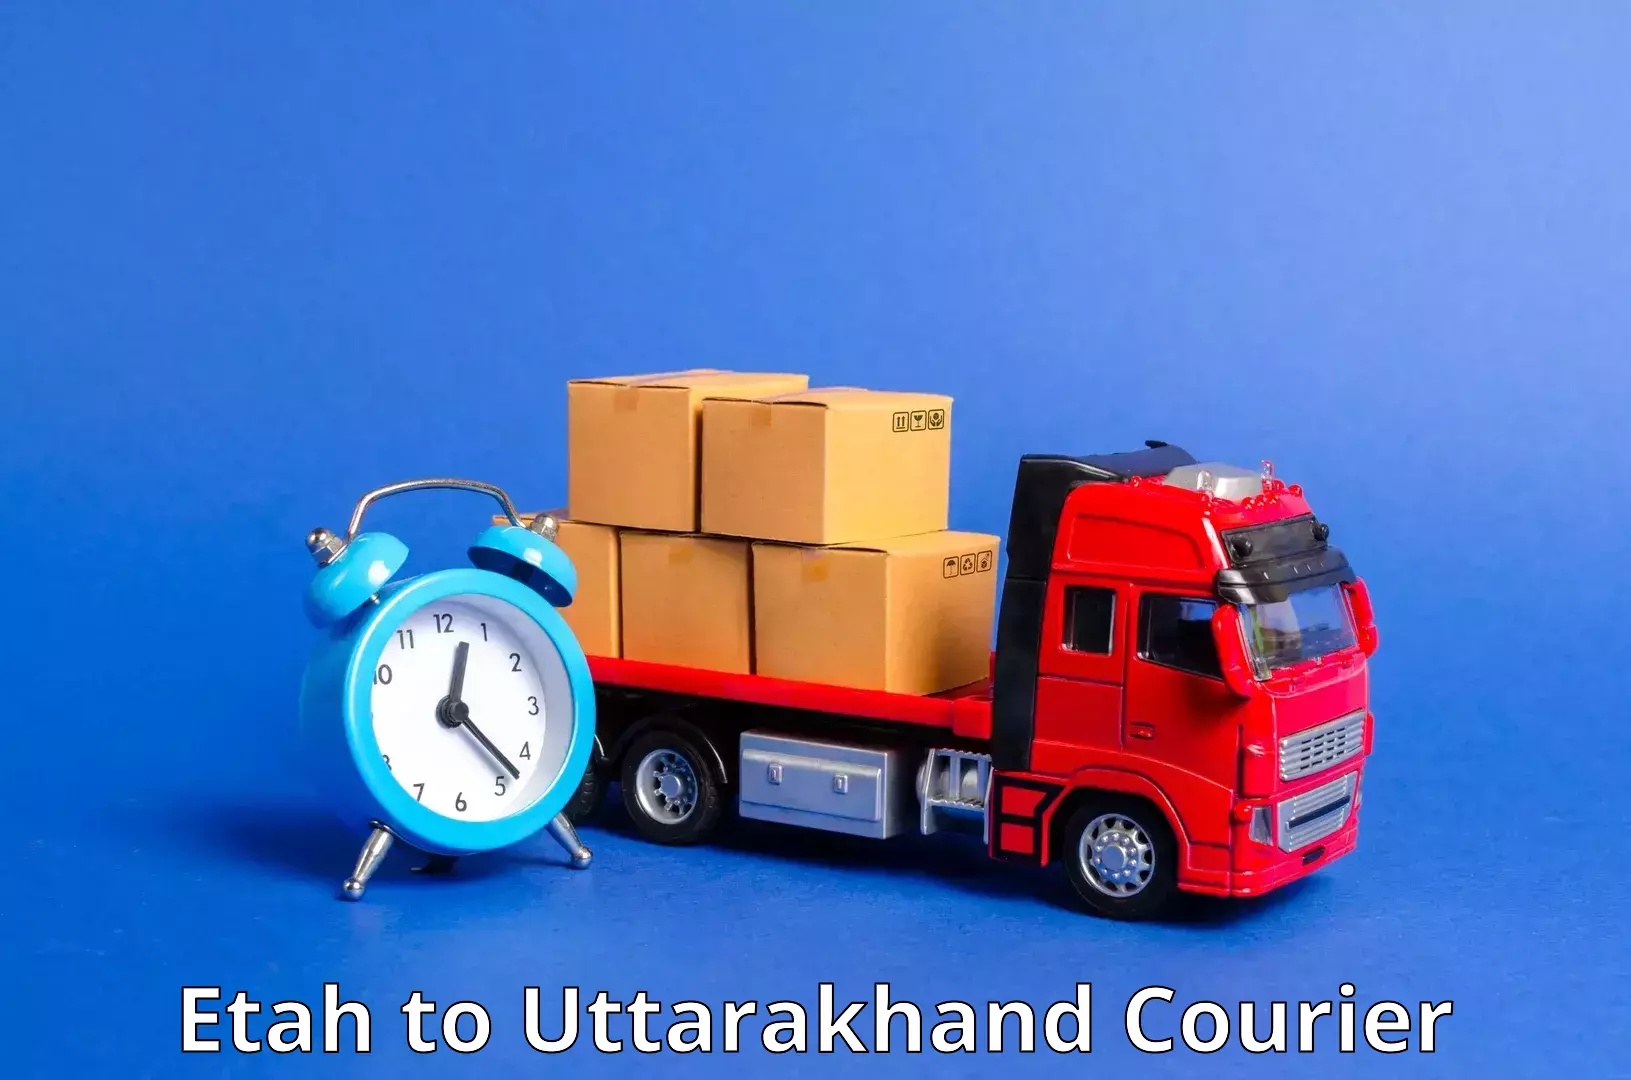 Seamless shipping experience Etah to Mussoorie